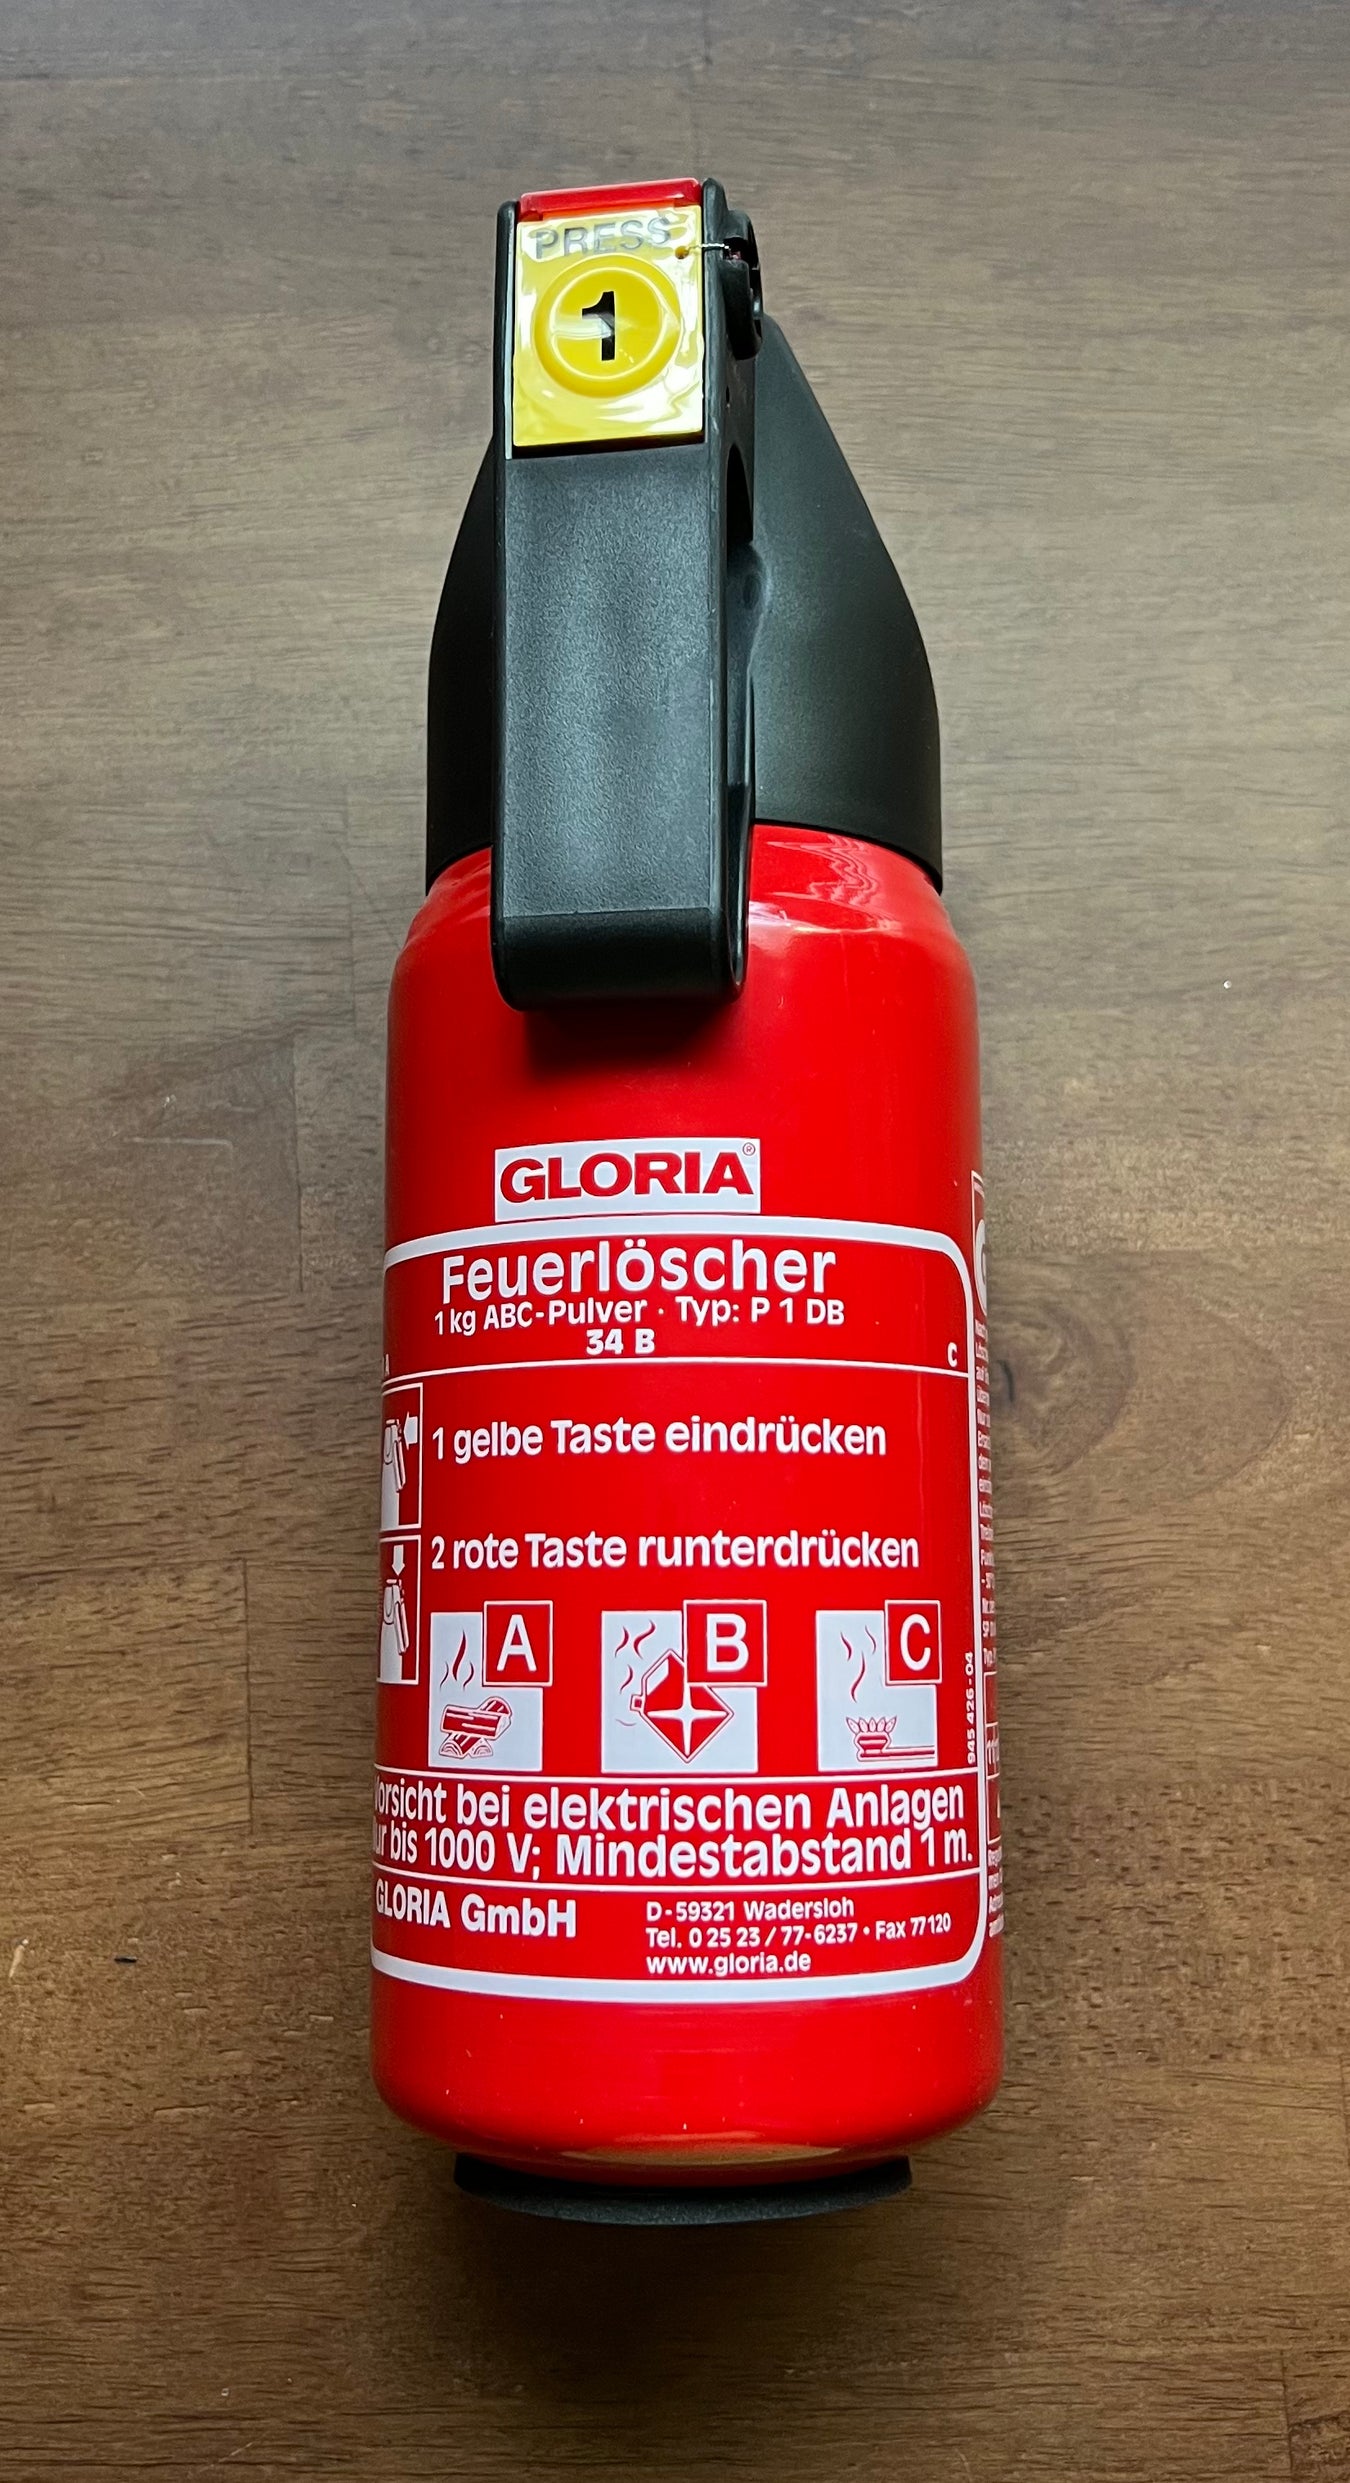 Bare Replacement Extinguishers